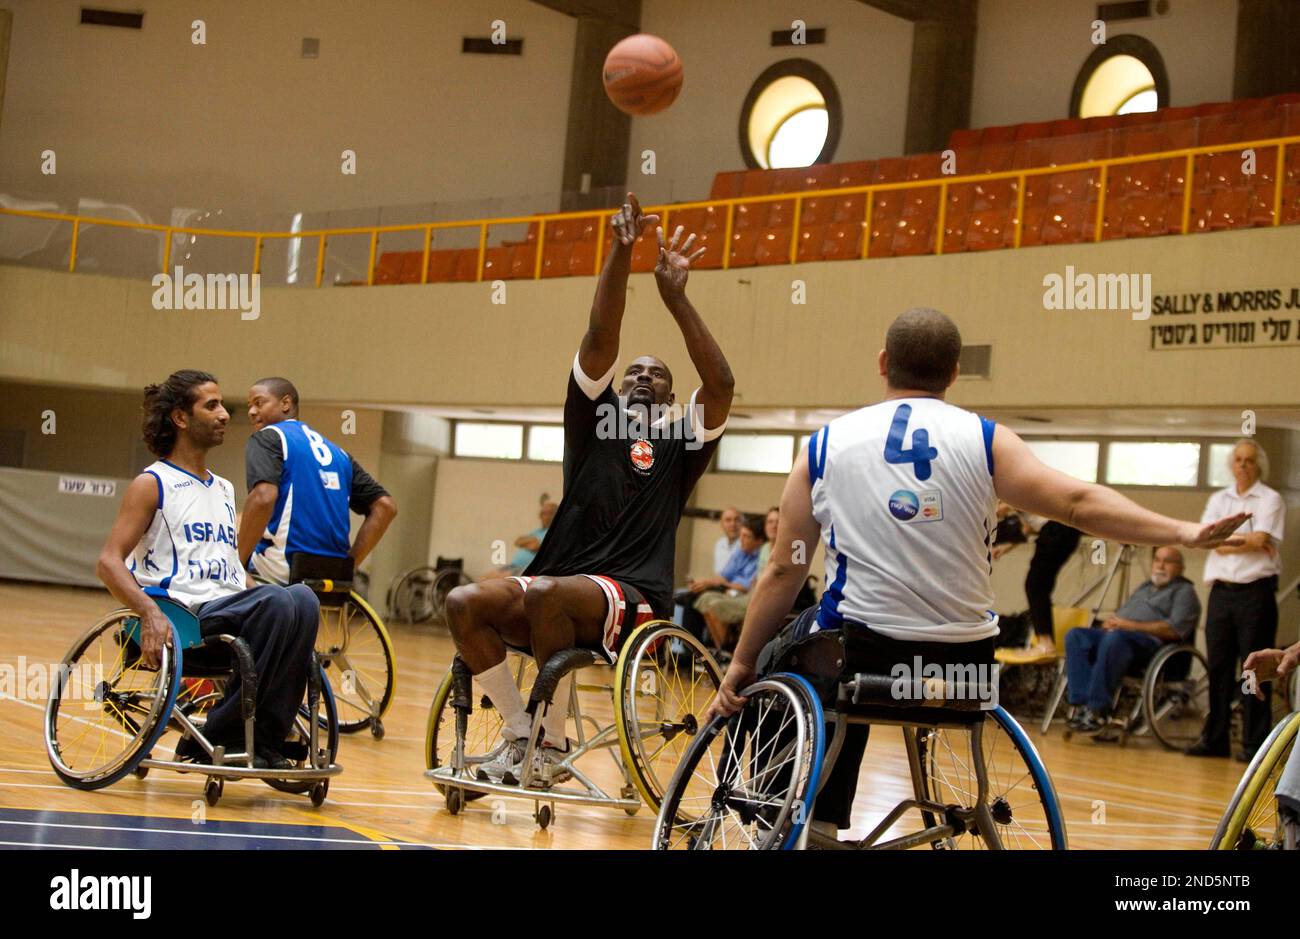 Former NBA basketball player Anthony Bonner, center, plays against members  of the national Israeli handicapped basketball team during a game to raise  awareness about disabilities and encourage support for the Paralympic Games